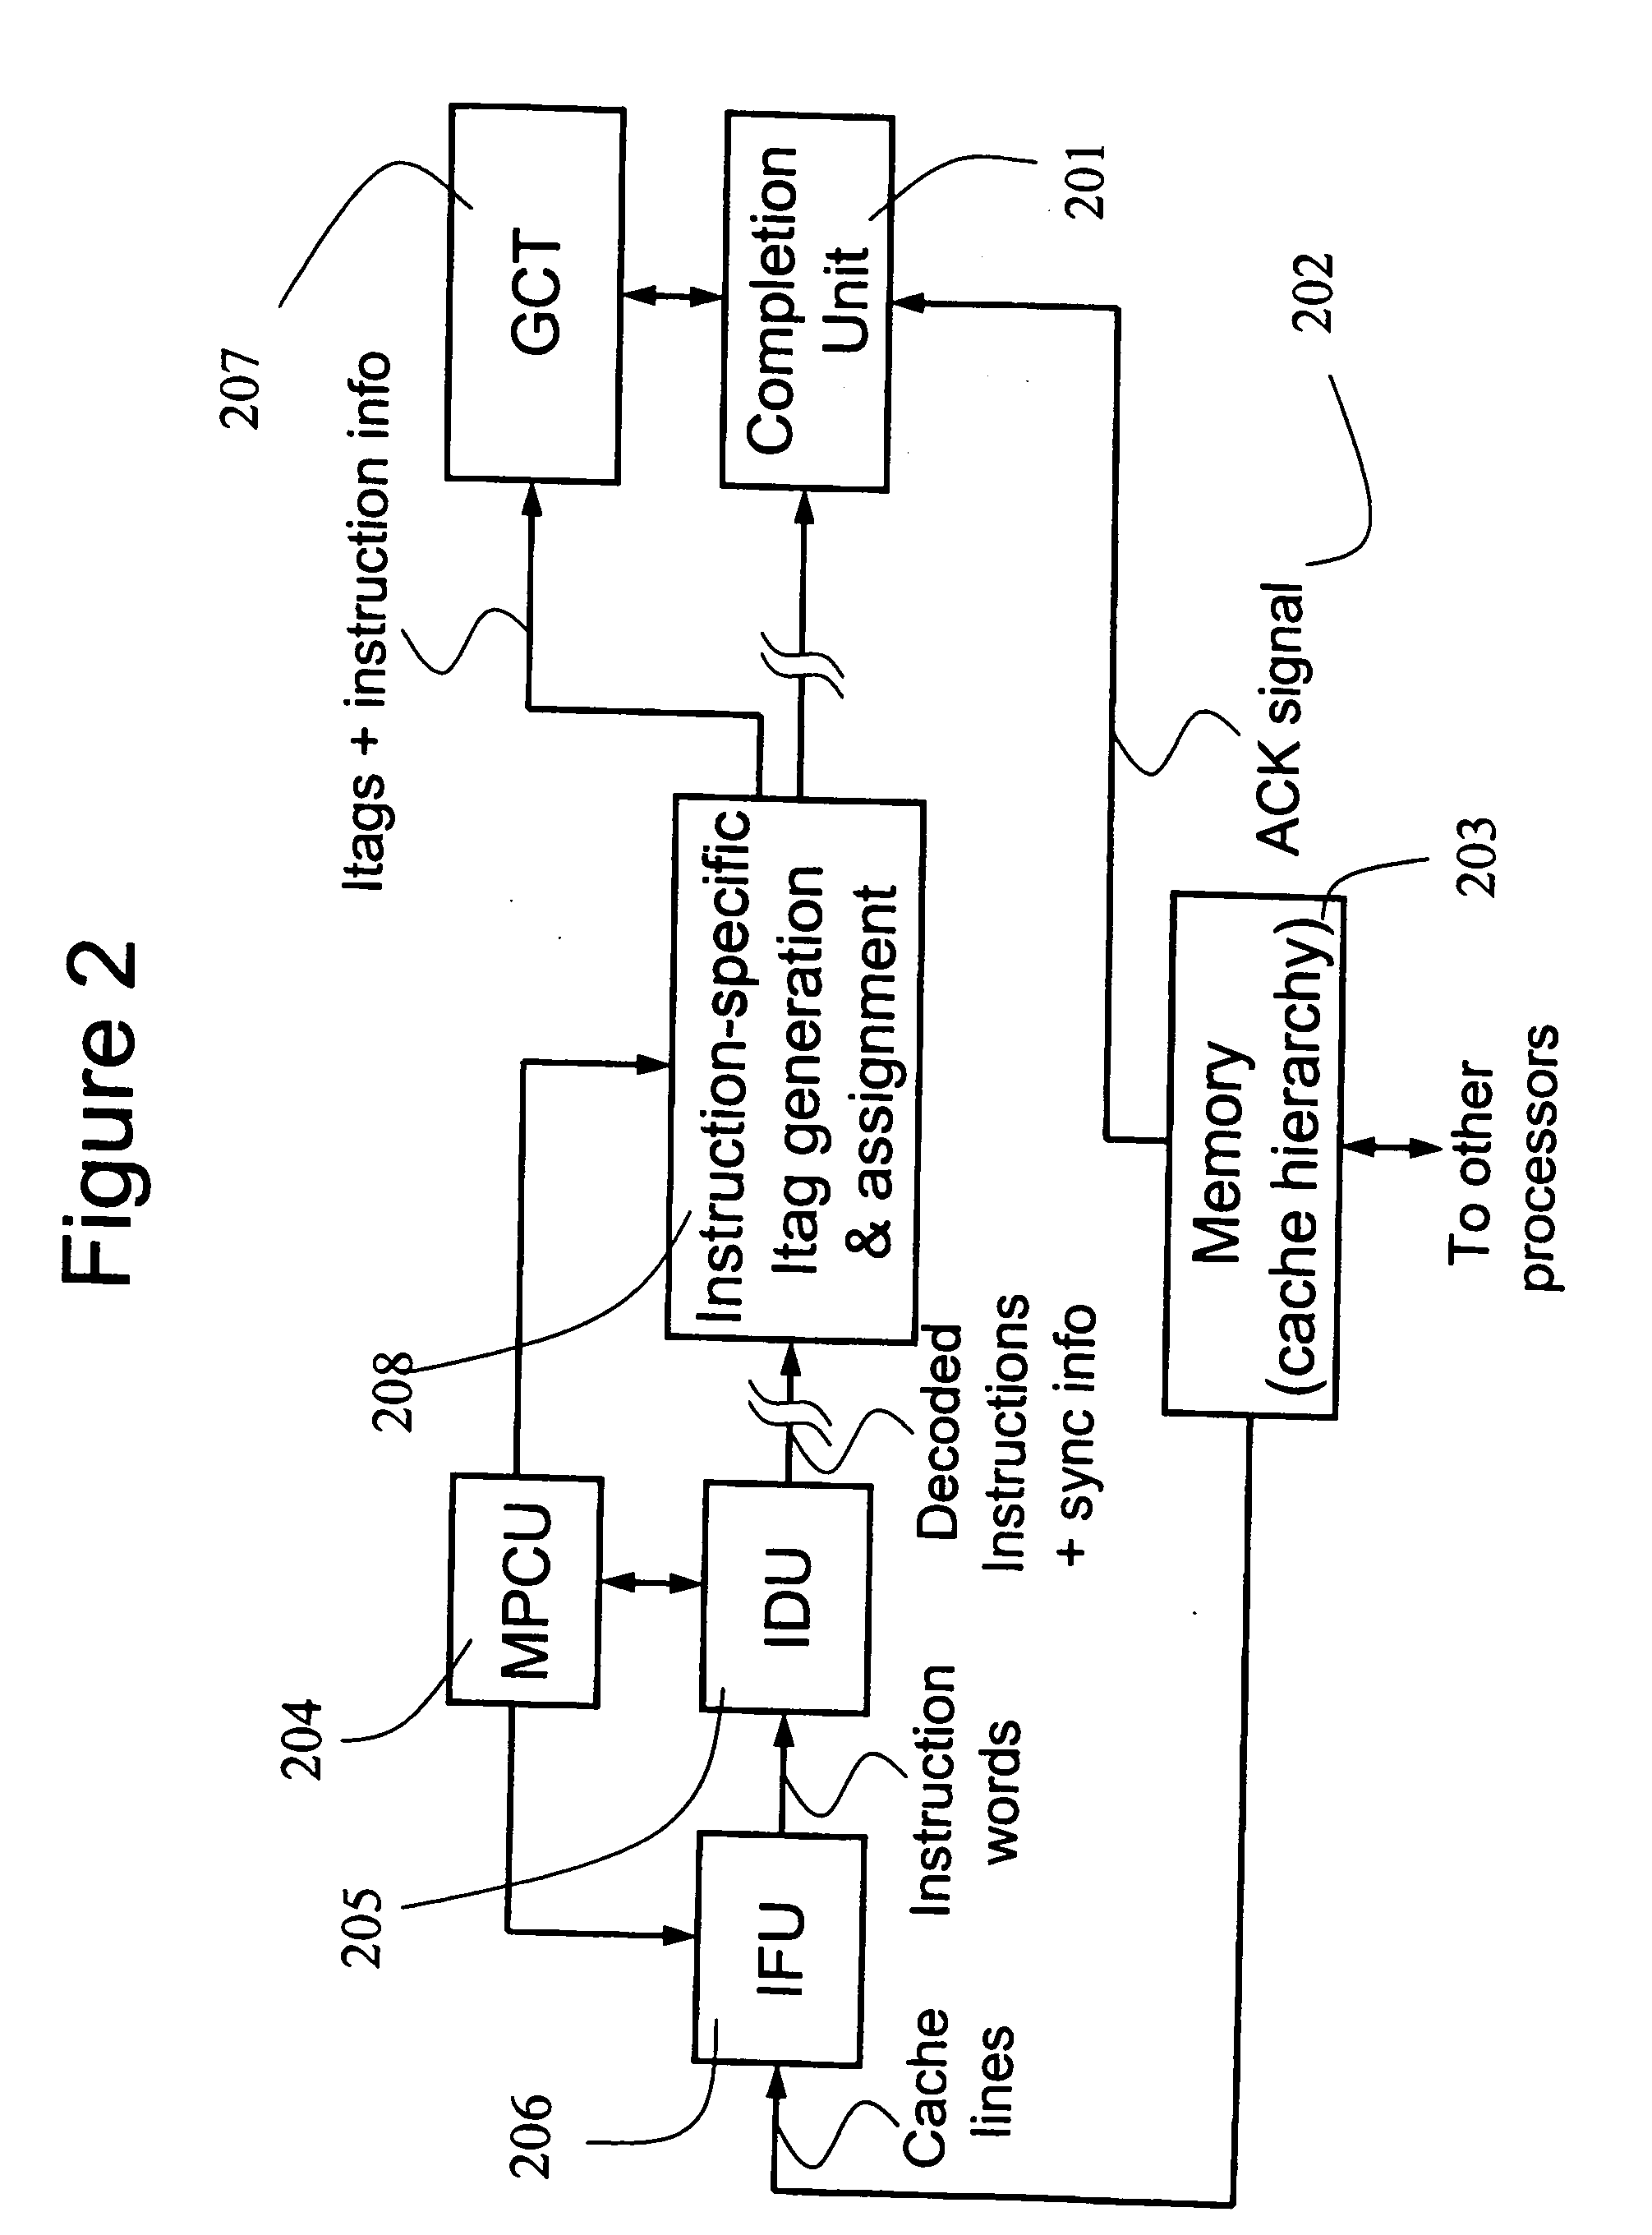 Method and apparatus for fast synchronization and out-of-order execution of instructions in a meta-program based computing system